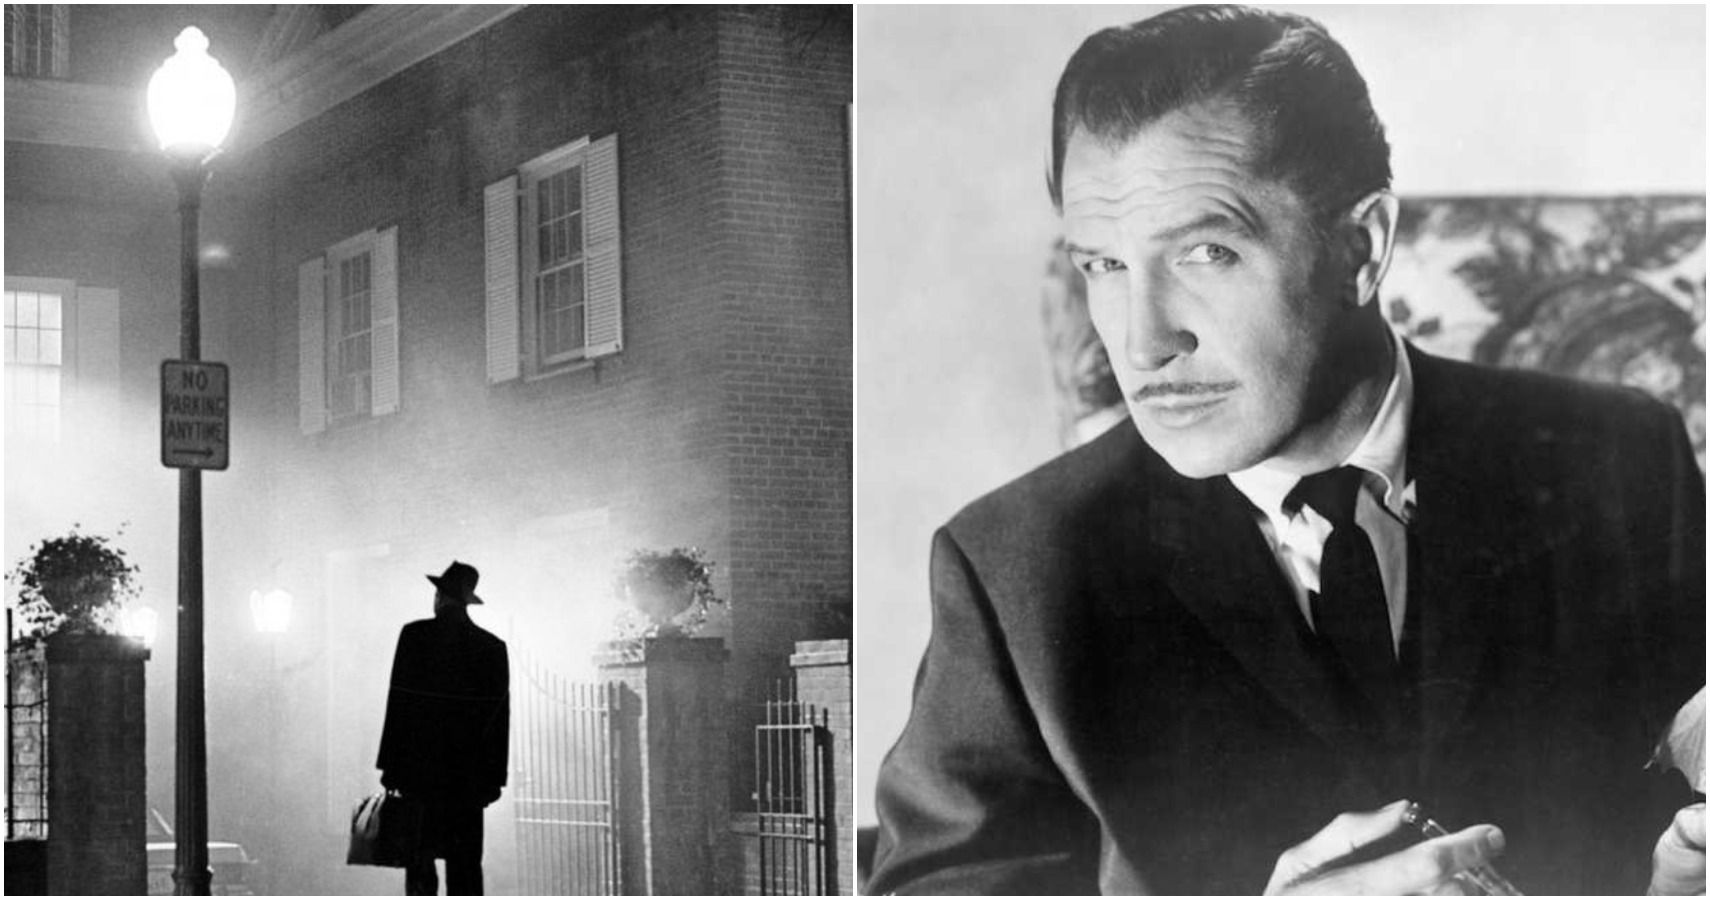 Exorcist and House on Haunted Hill